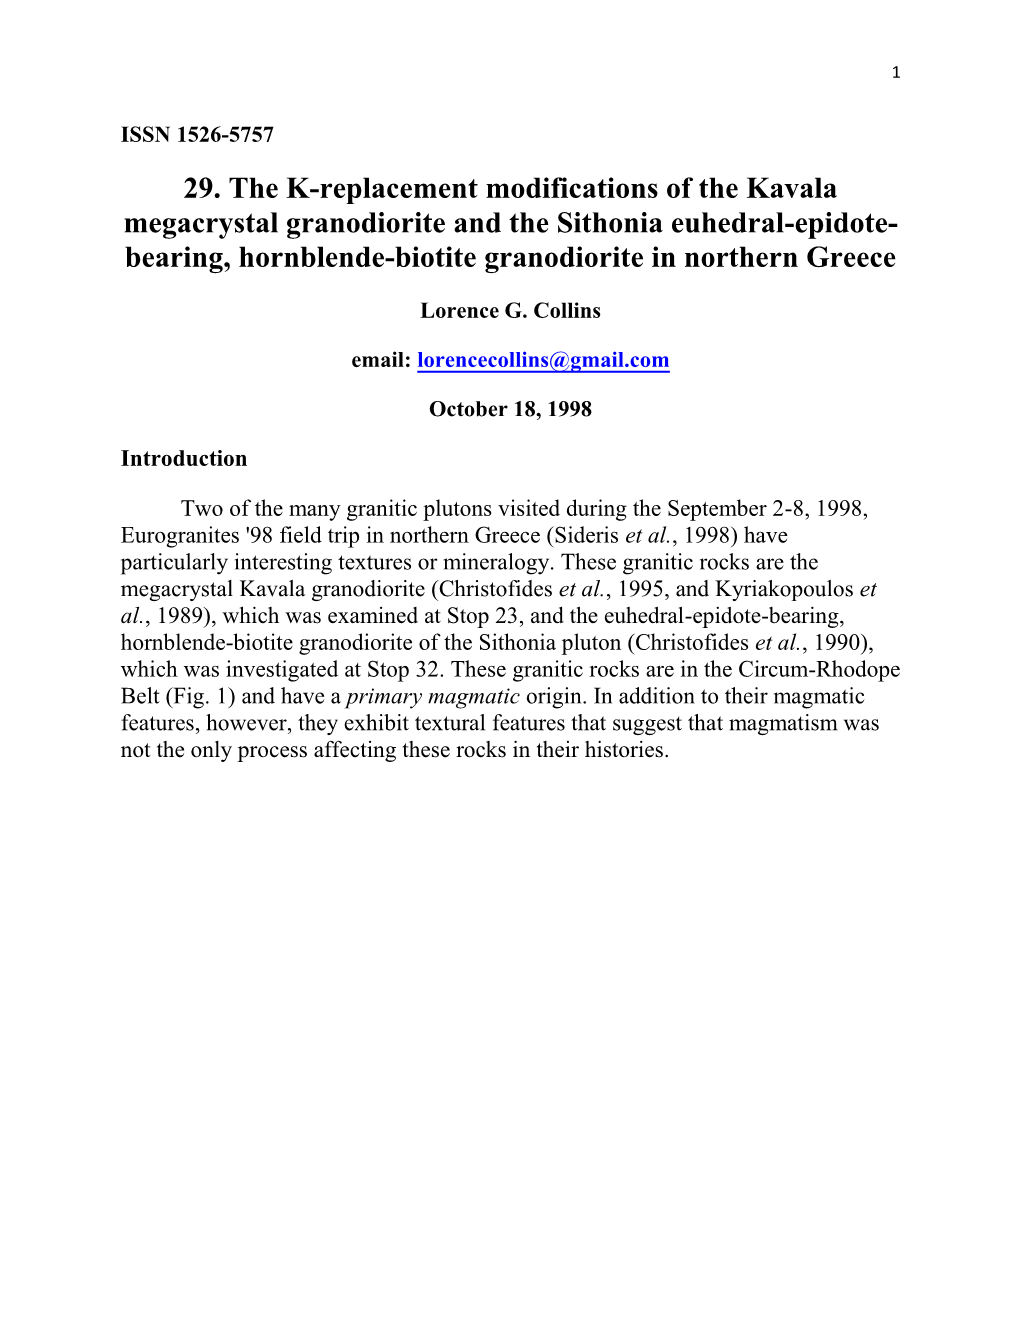 29. the K-Replacement Modifications of the Kavala Megacrystal